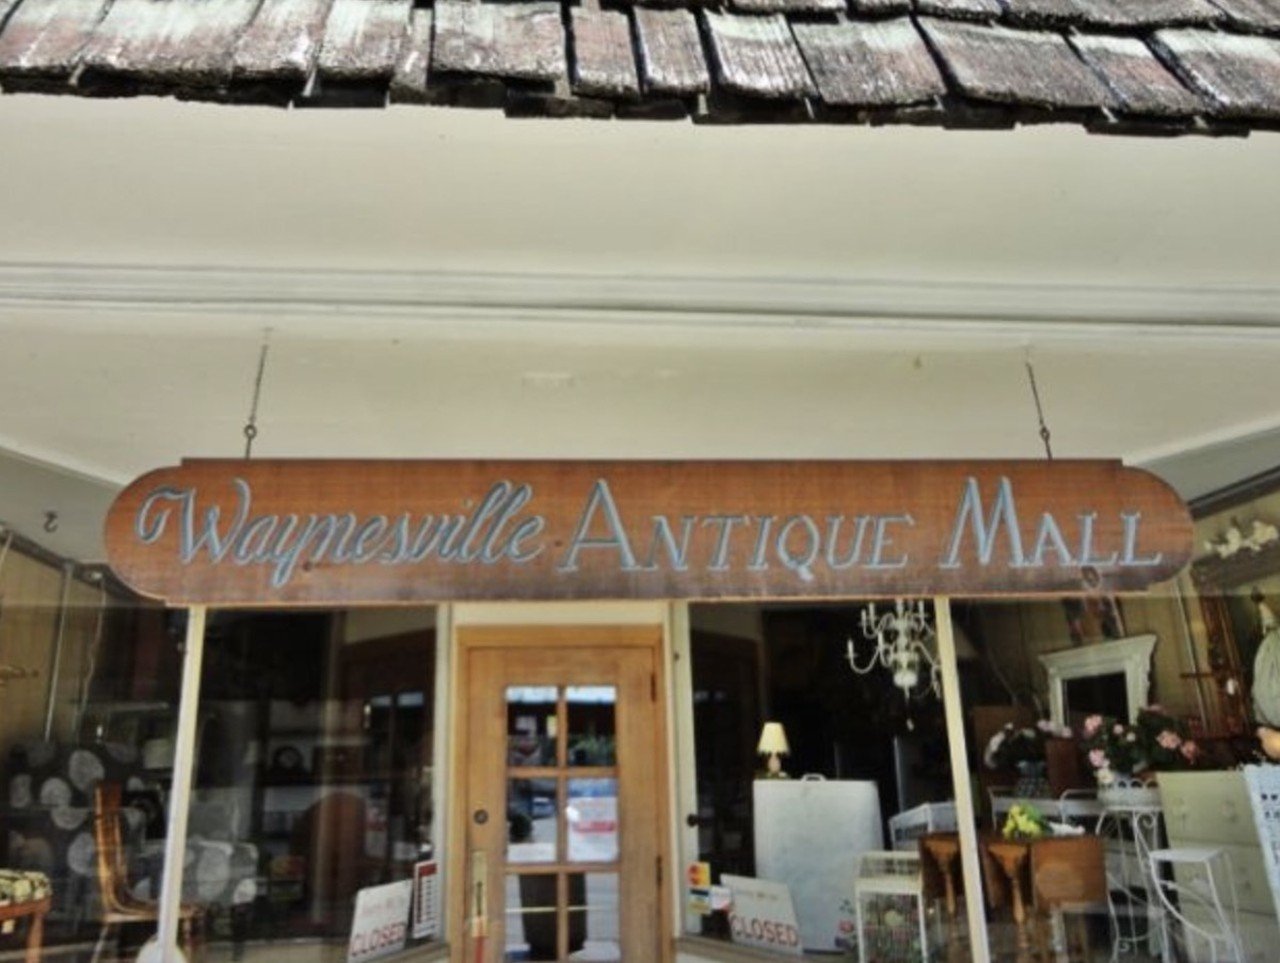 Go Antiquing in Waynesville
The quaint, rural town of Waynesville is home to over 60 shops and restaurants. But with two antique malls and over a dozen antique shops, it’s no surprise that they are considered the “Antiques Capital of the Midwest.”